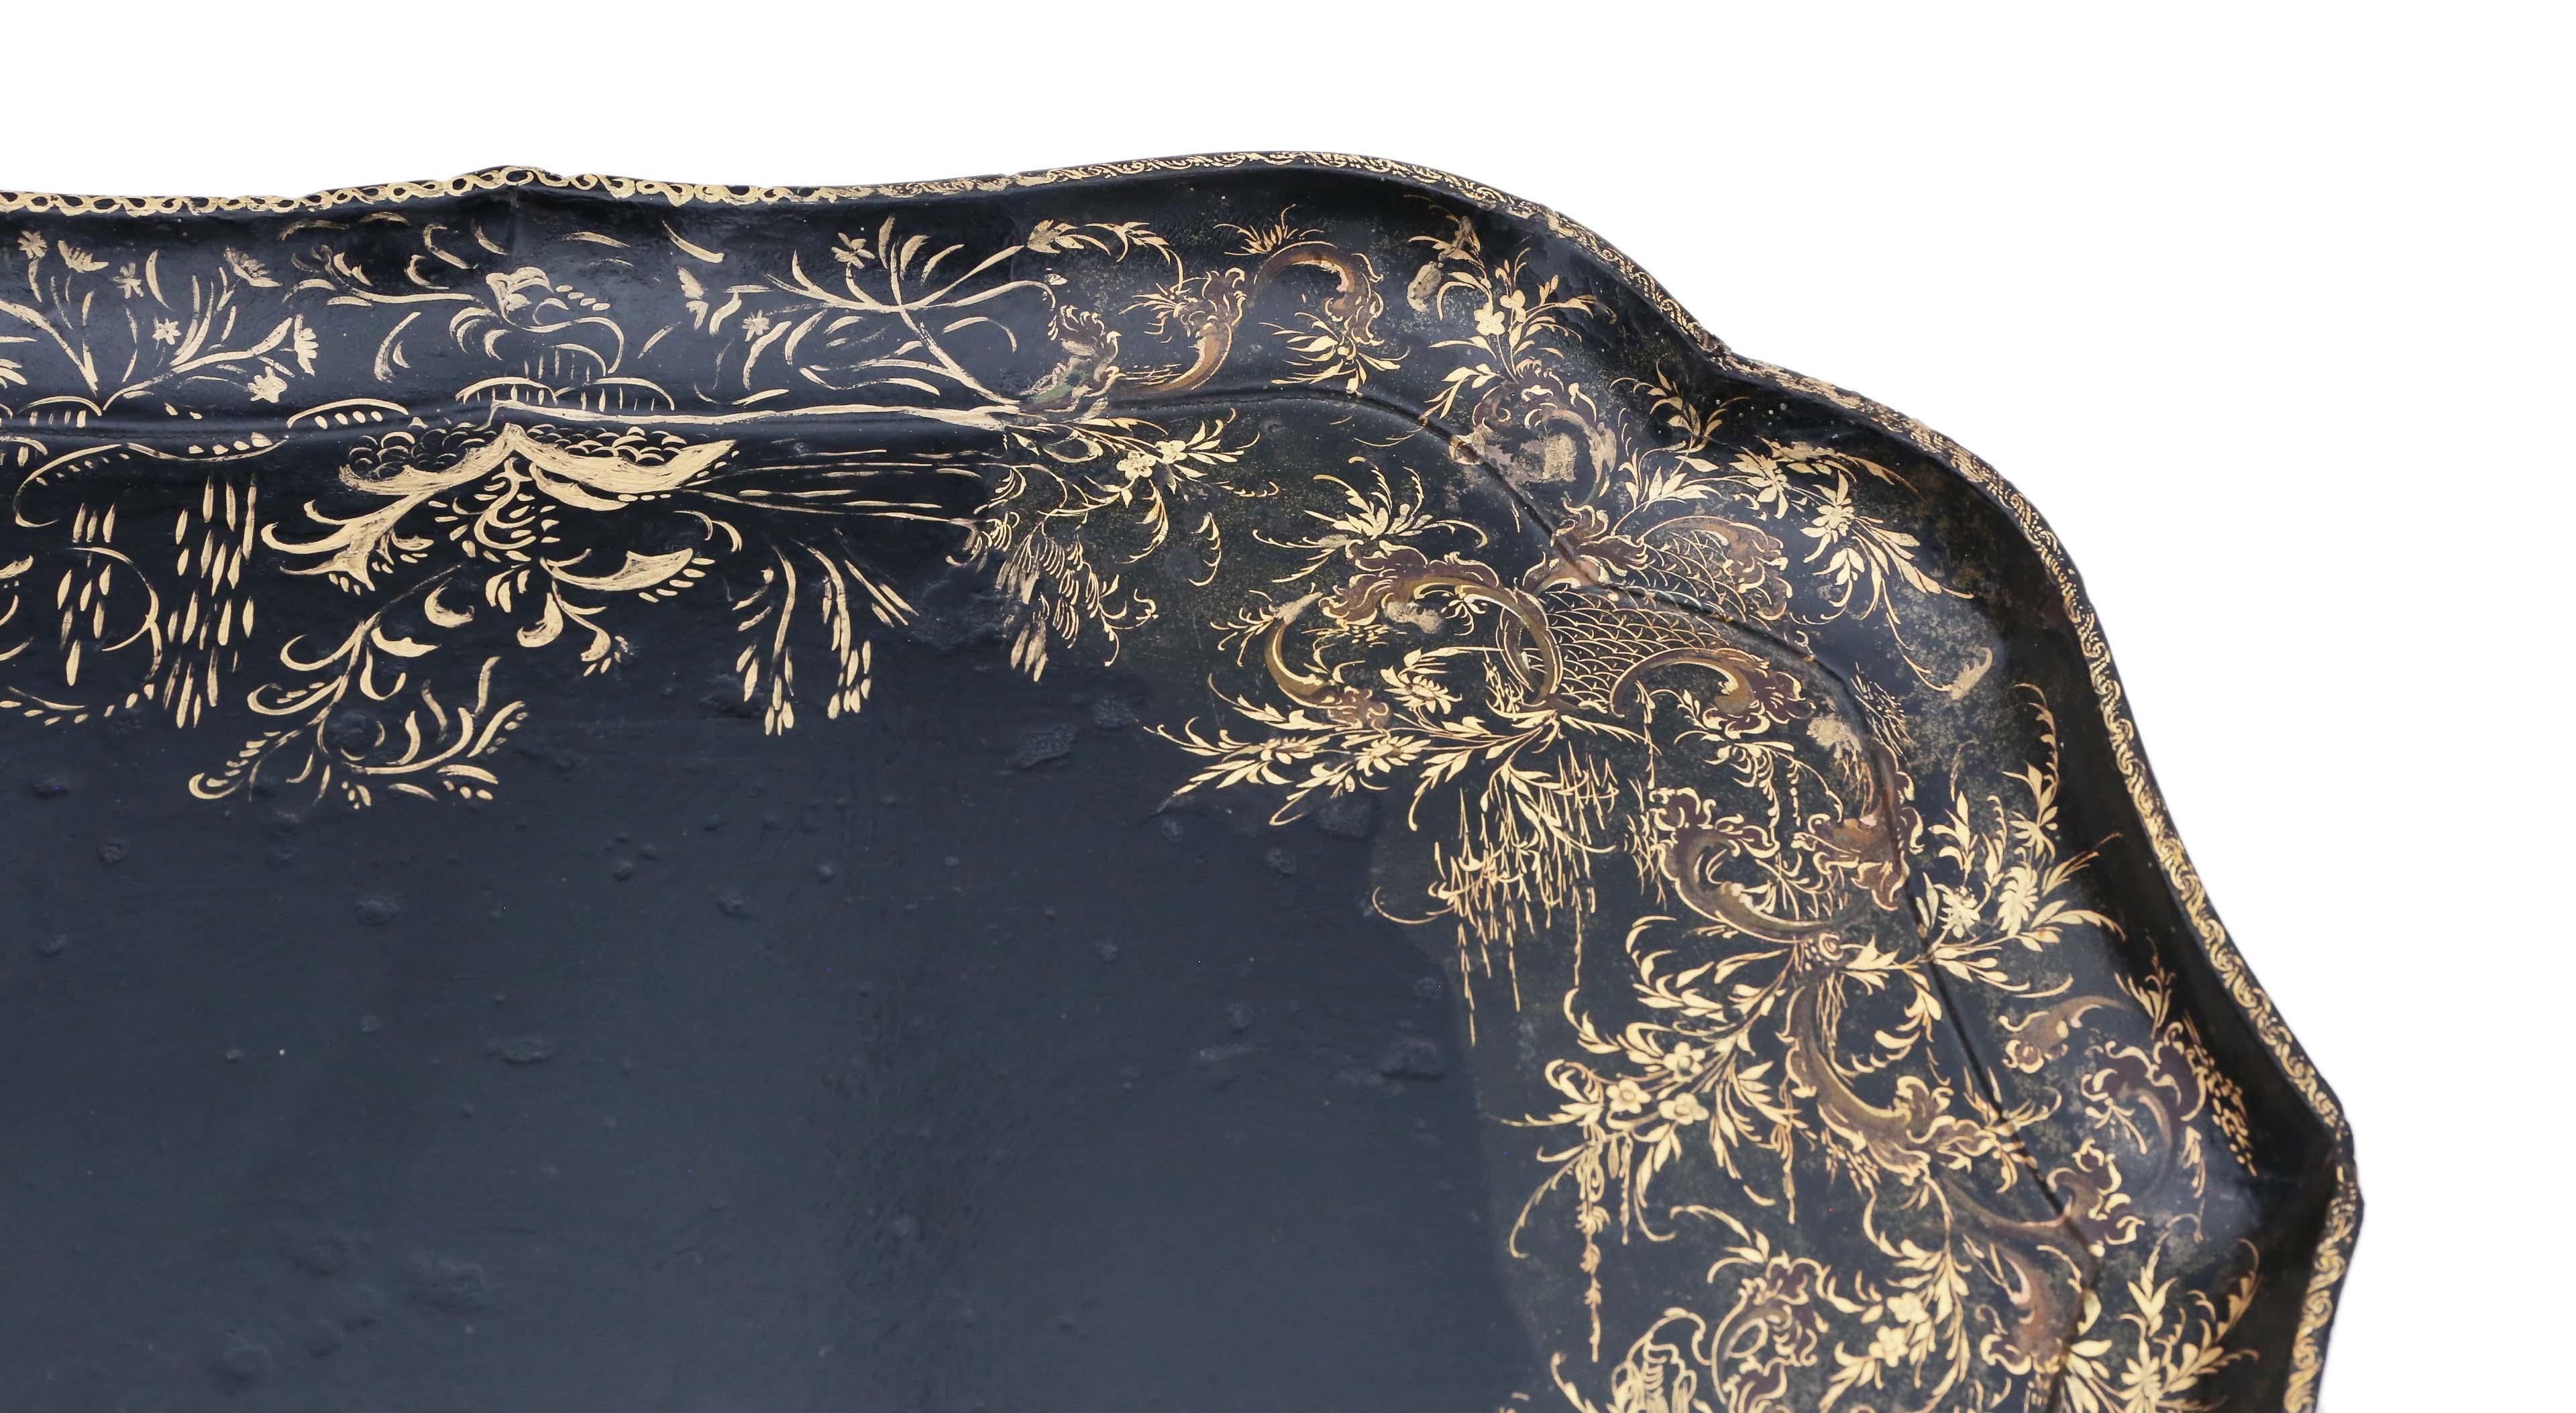 Antique Victorian Black Lacquer Papier-Mâché Tray In Good Condition For Sale In Wisbech, Cambridgeshire